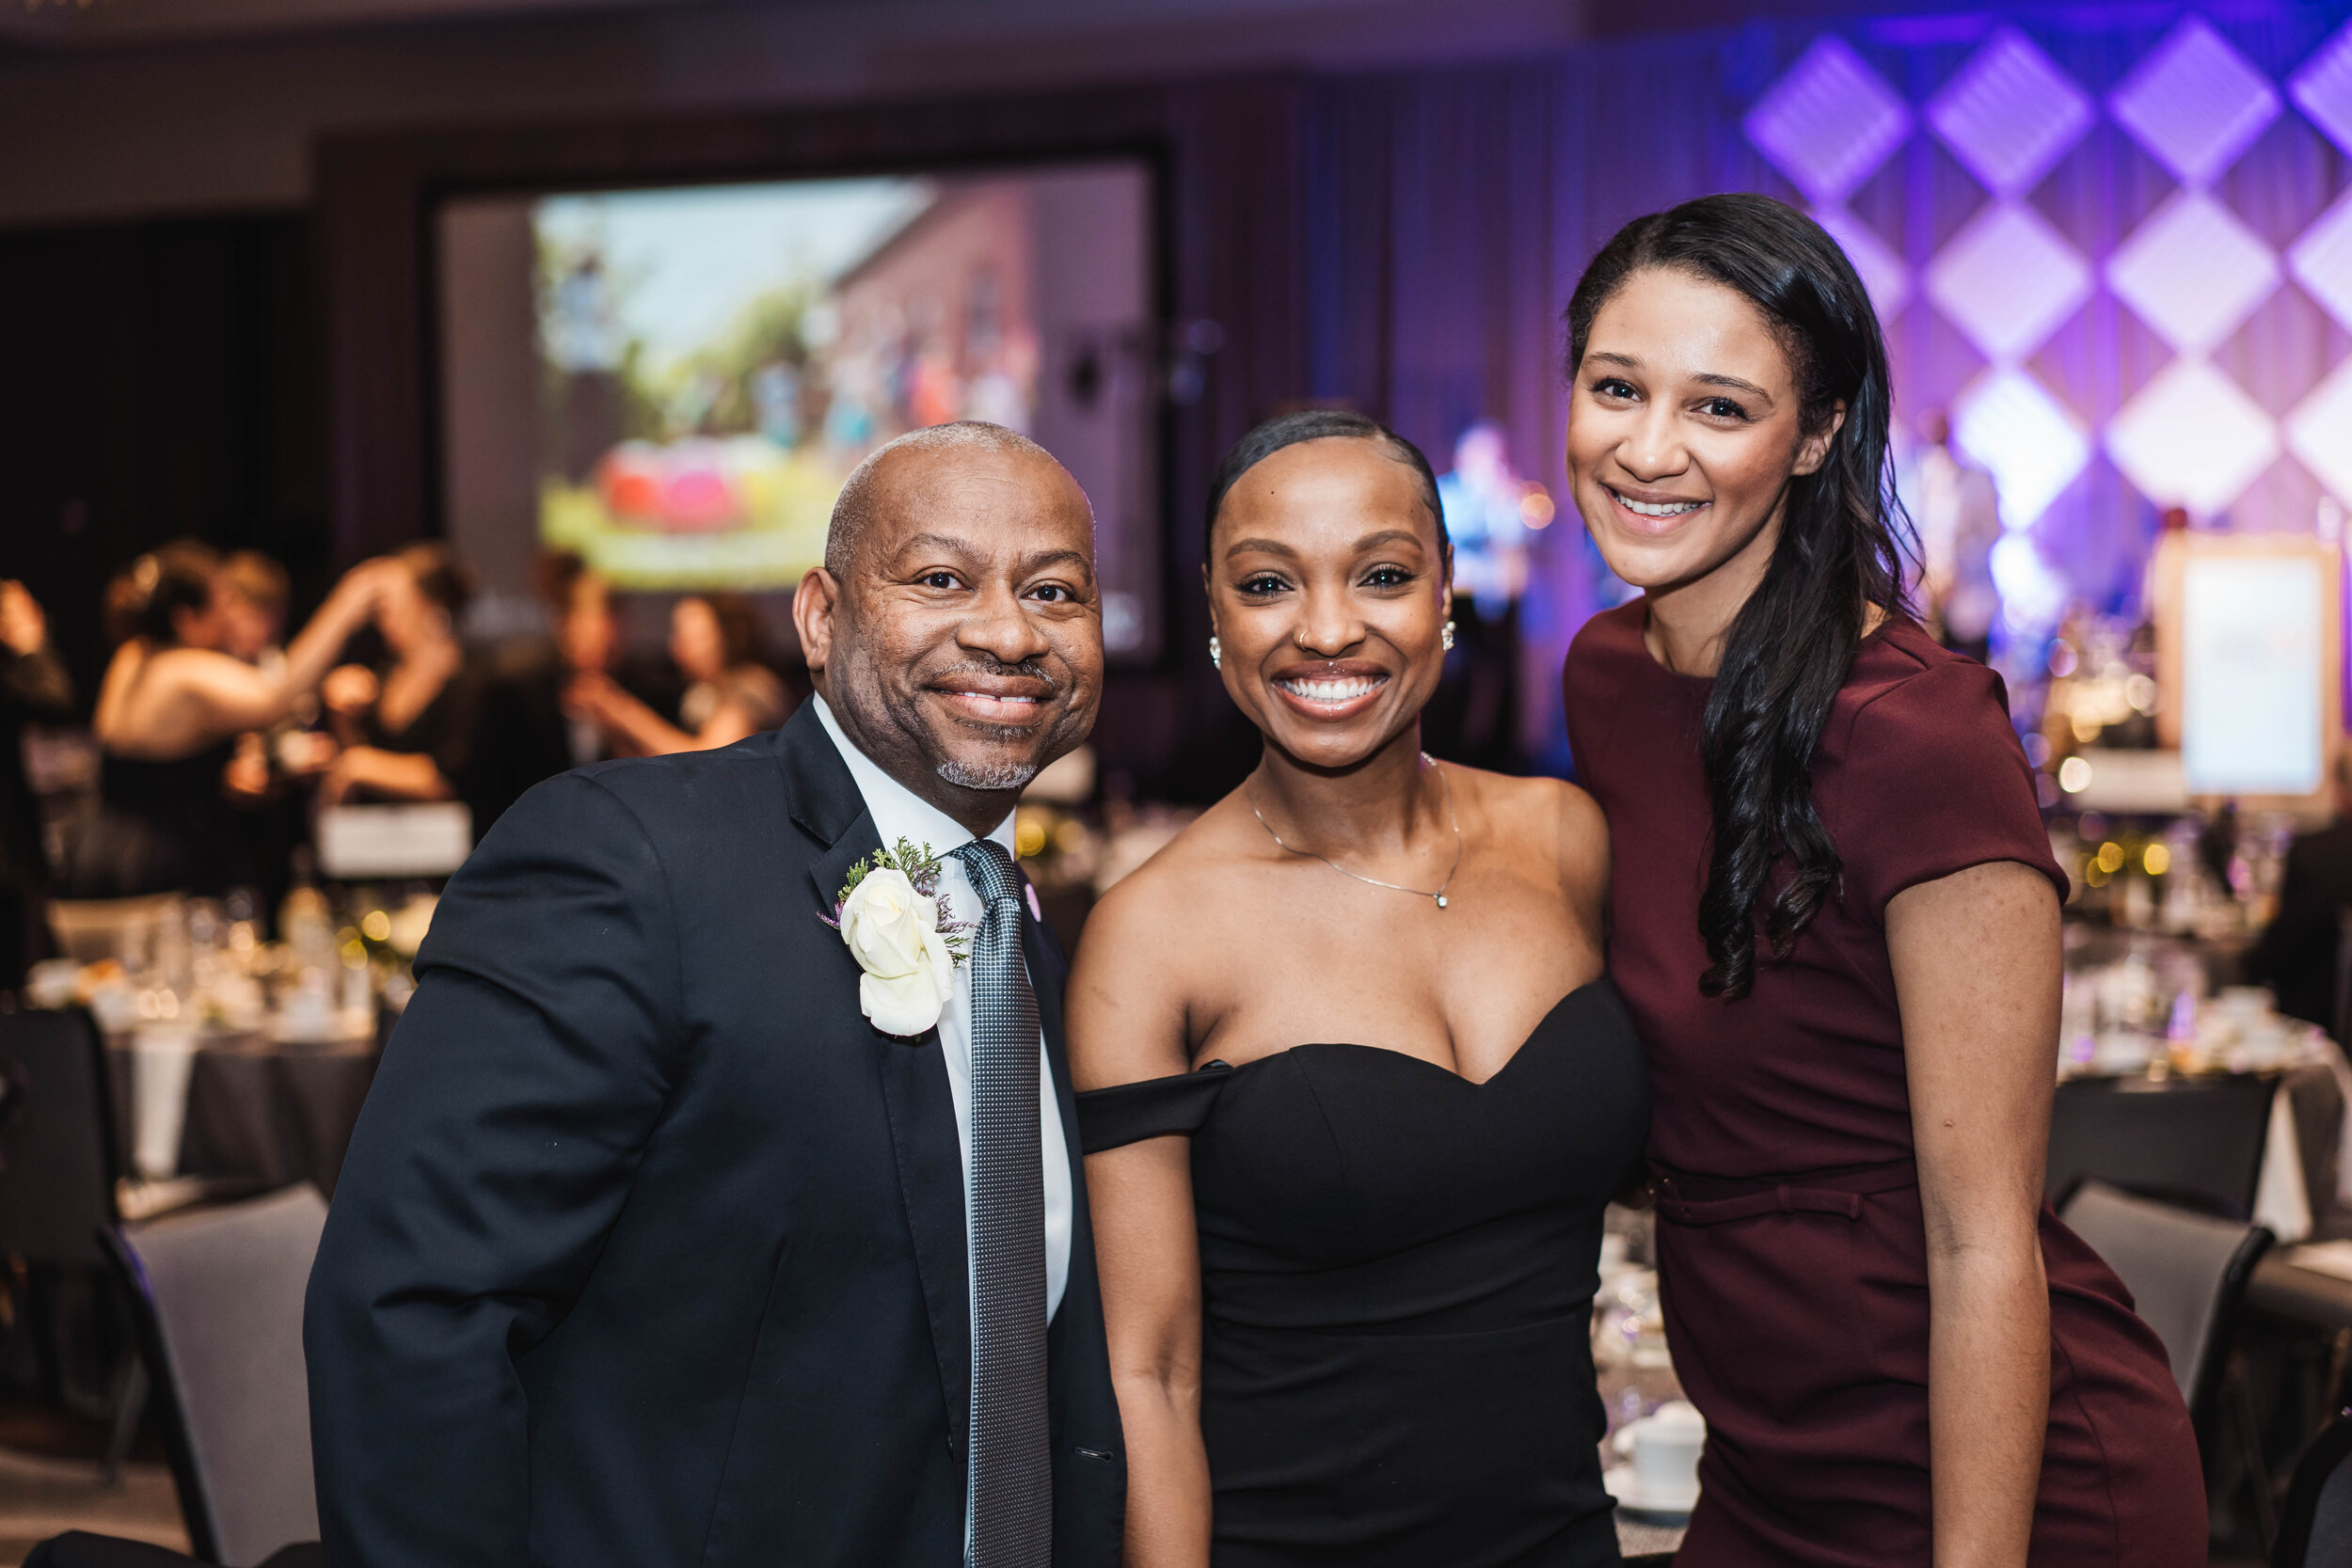 denver event photography at gaylord rockies gala black tie event - 6.jpg